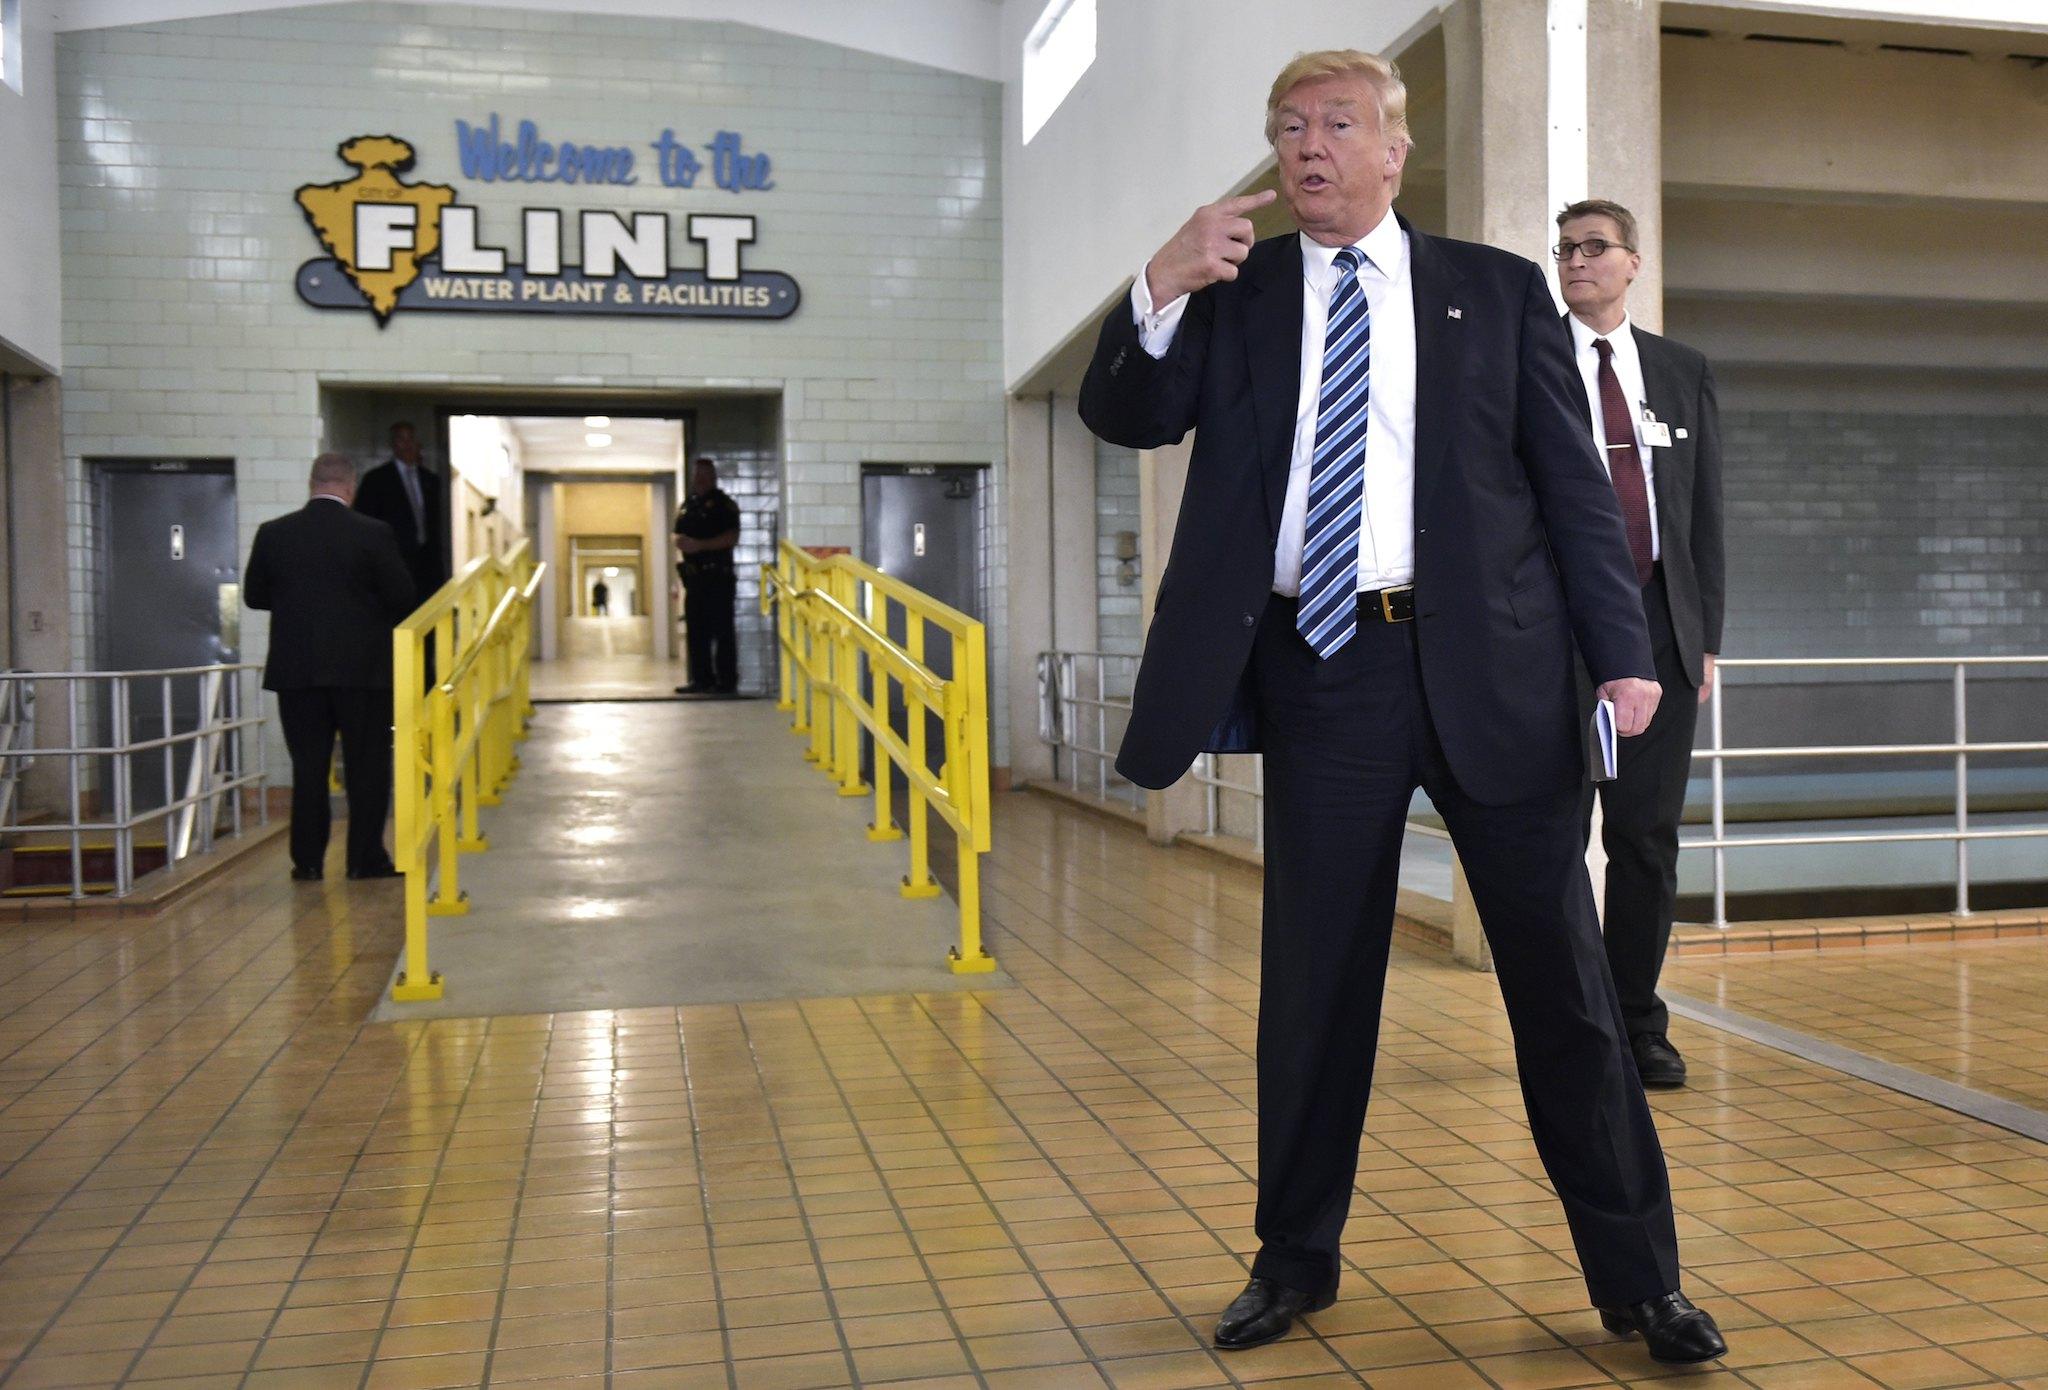 Republican presidential nominee Donald Trump speaks following a tour of the Flint water plant on September 14, 2016 in Flint, Michigan